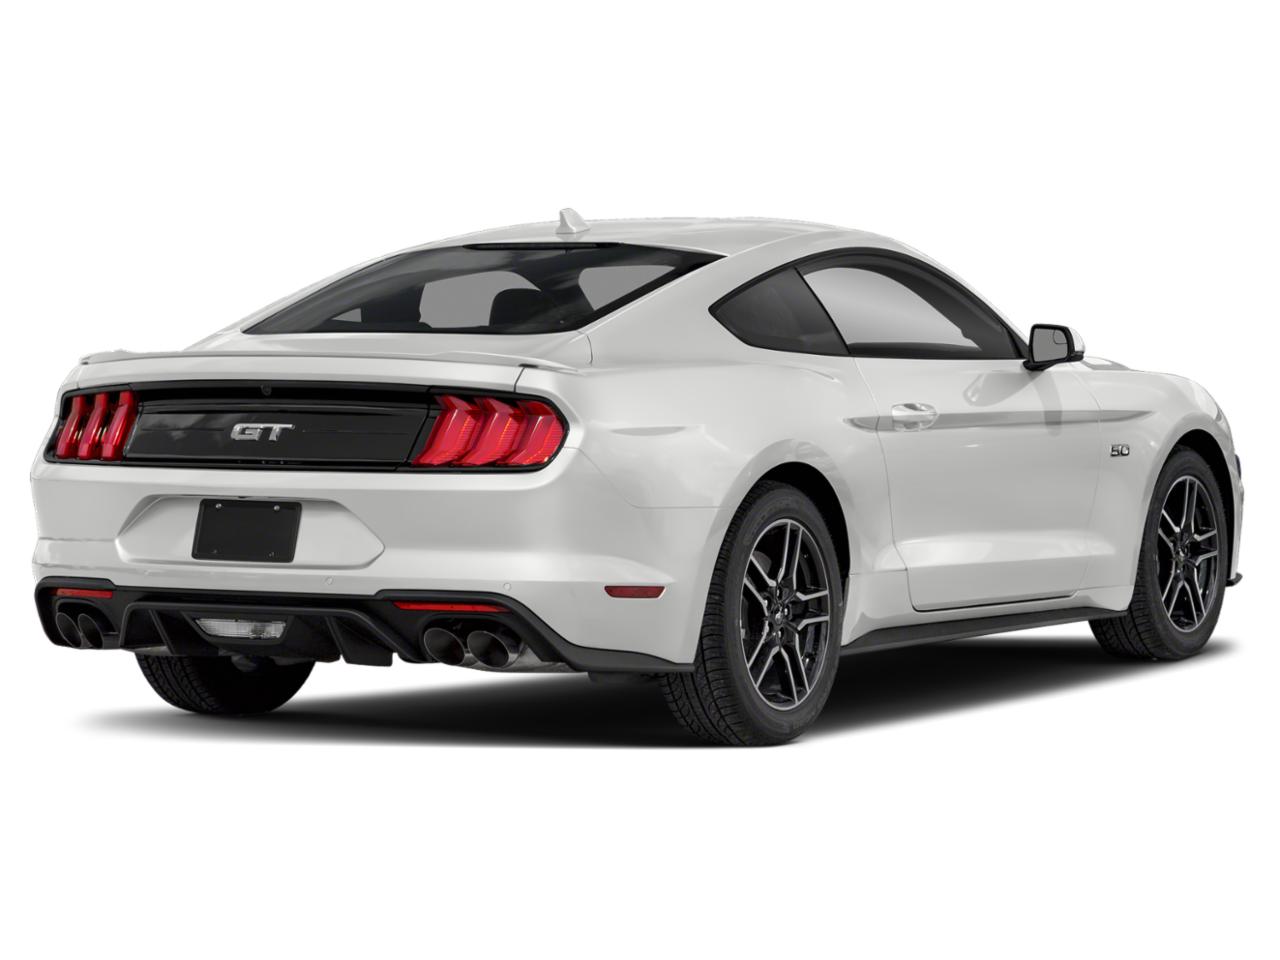 2019 Ford Mustang Vehicle Photo in MILFORD, OH 45150-1684